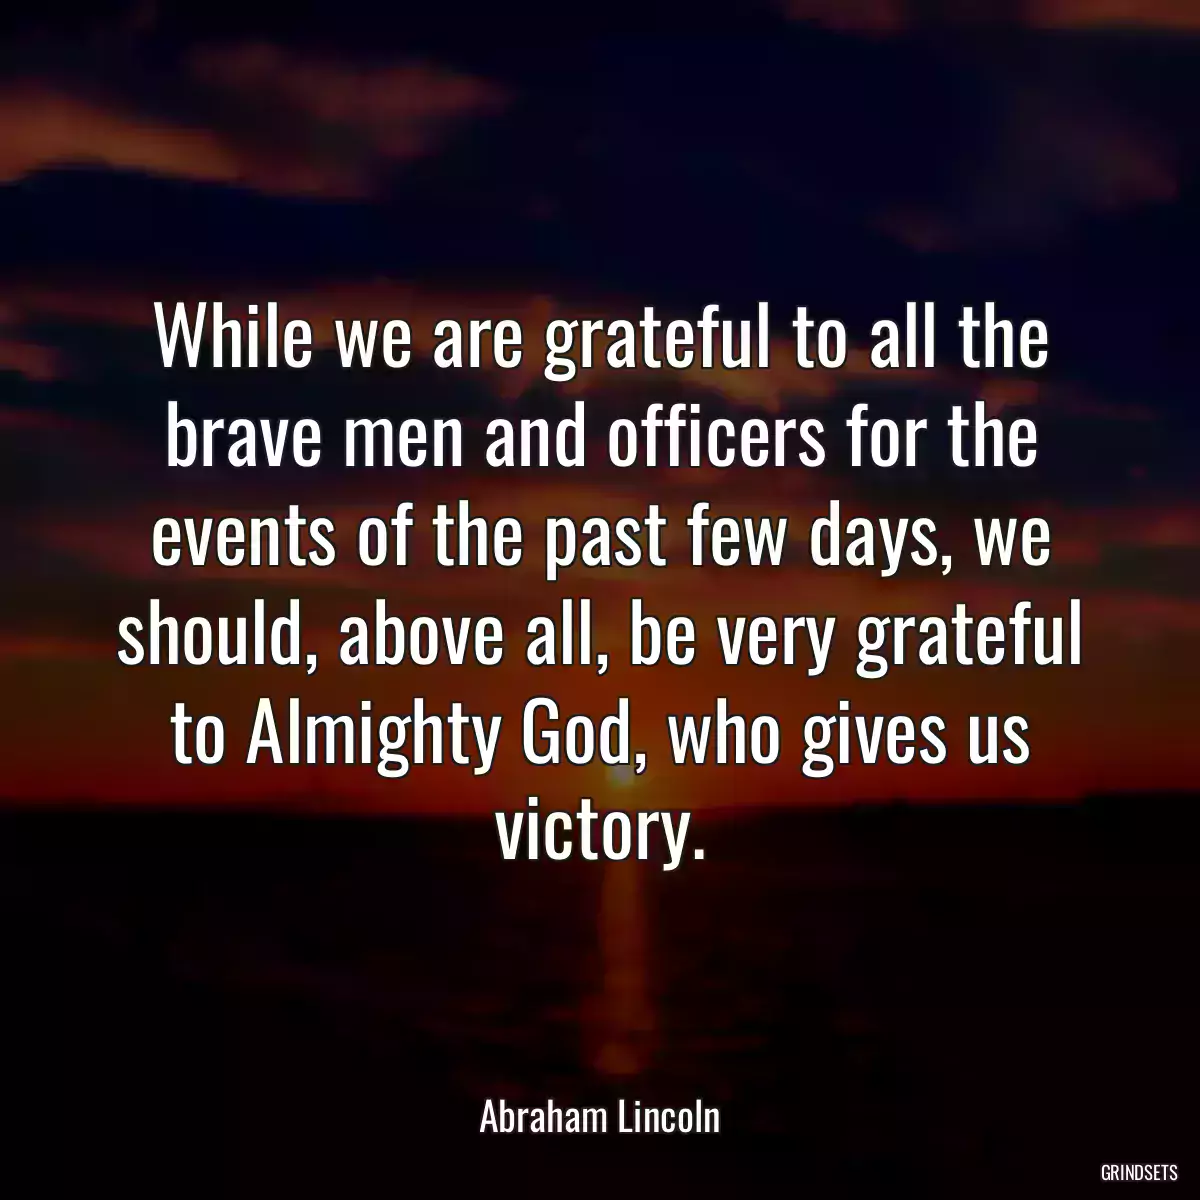 While we are grateful to all the brave men and officers for the events of the past few days, we should, above all, be very grateful to Almighty God, who gives us victory.